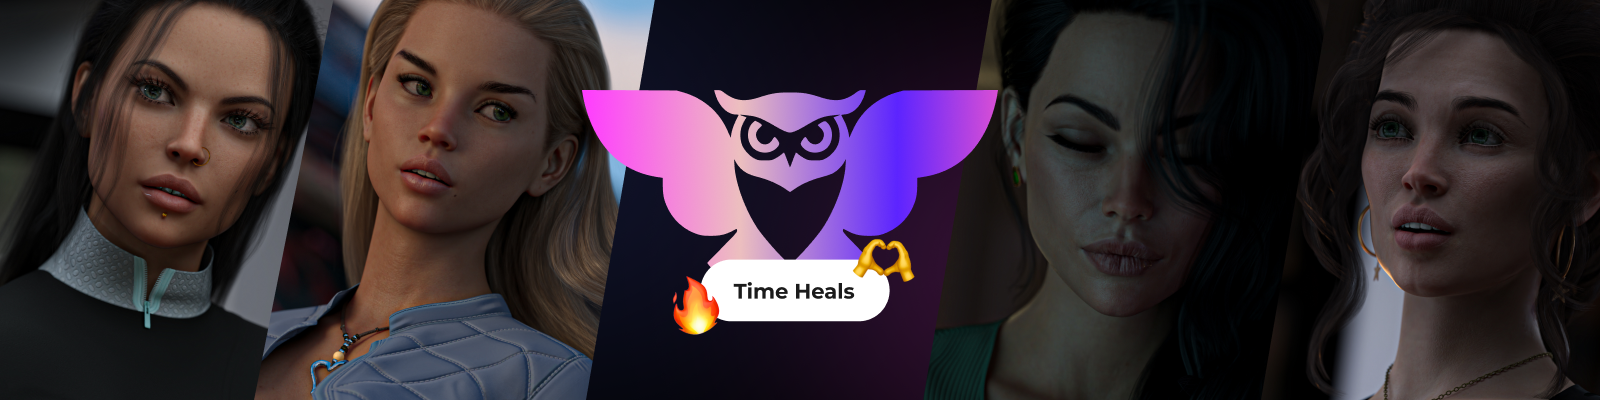 Time Heals1.png